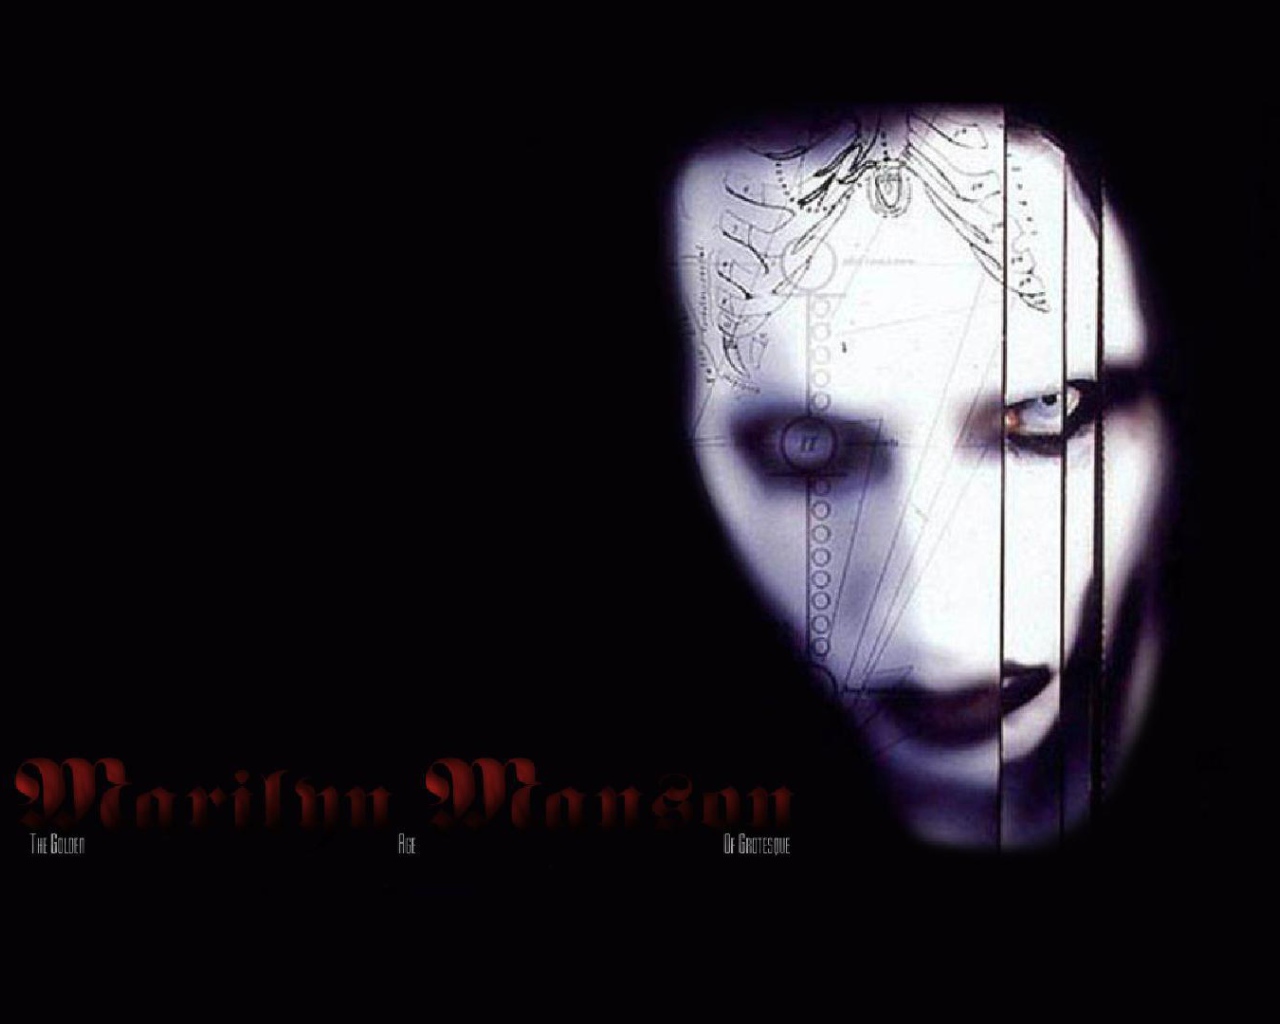 Wallpapers with Marilyn Manson